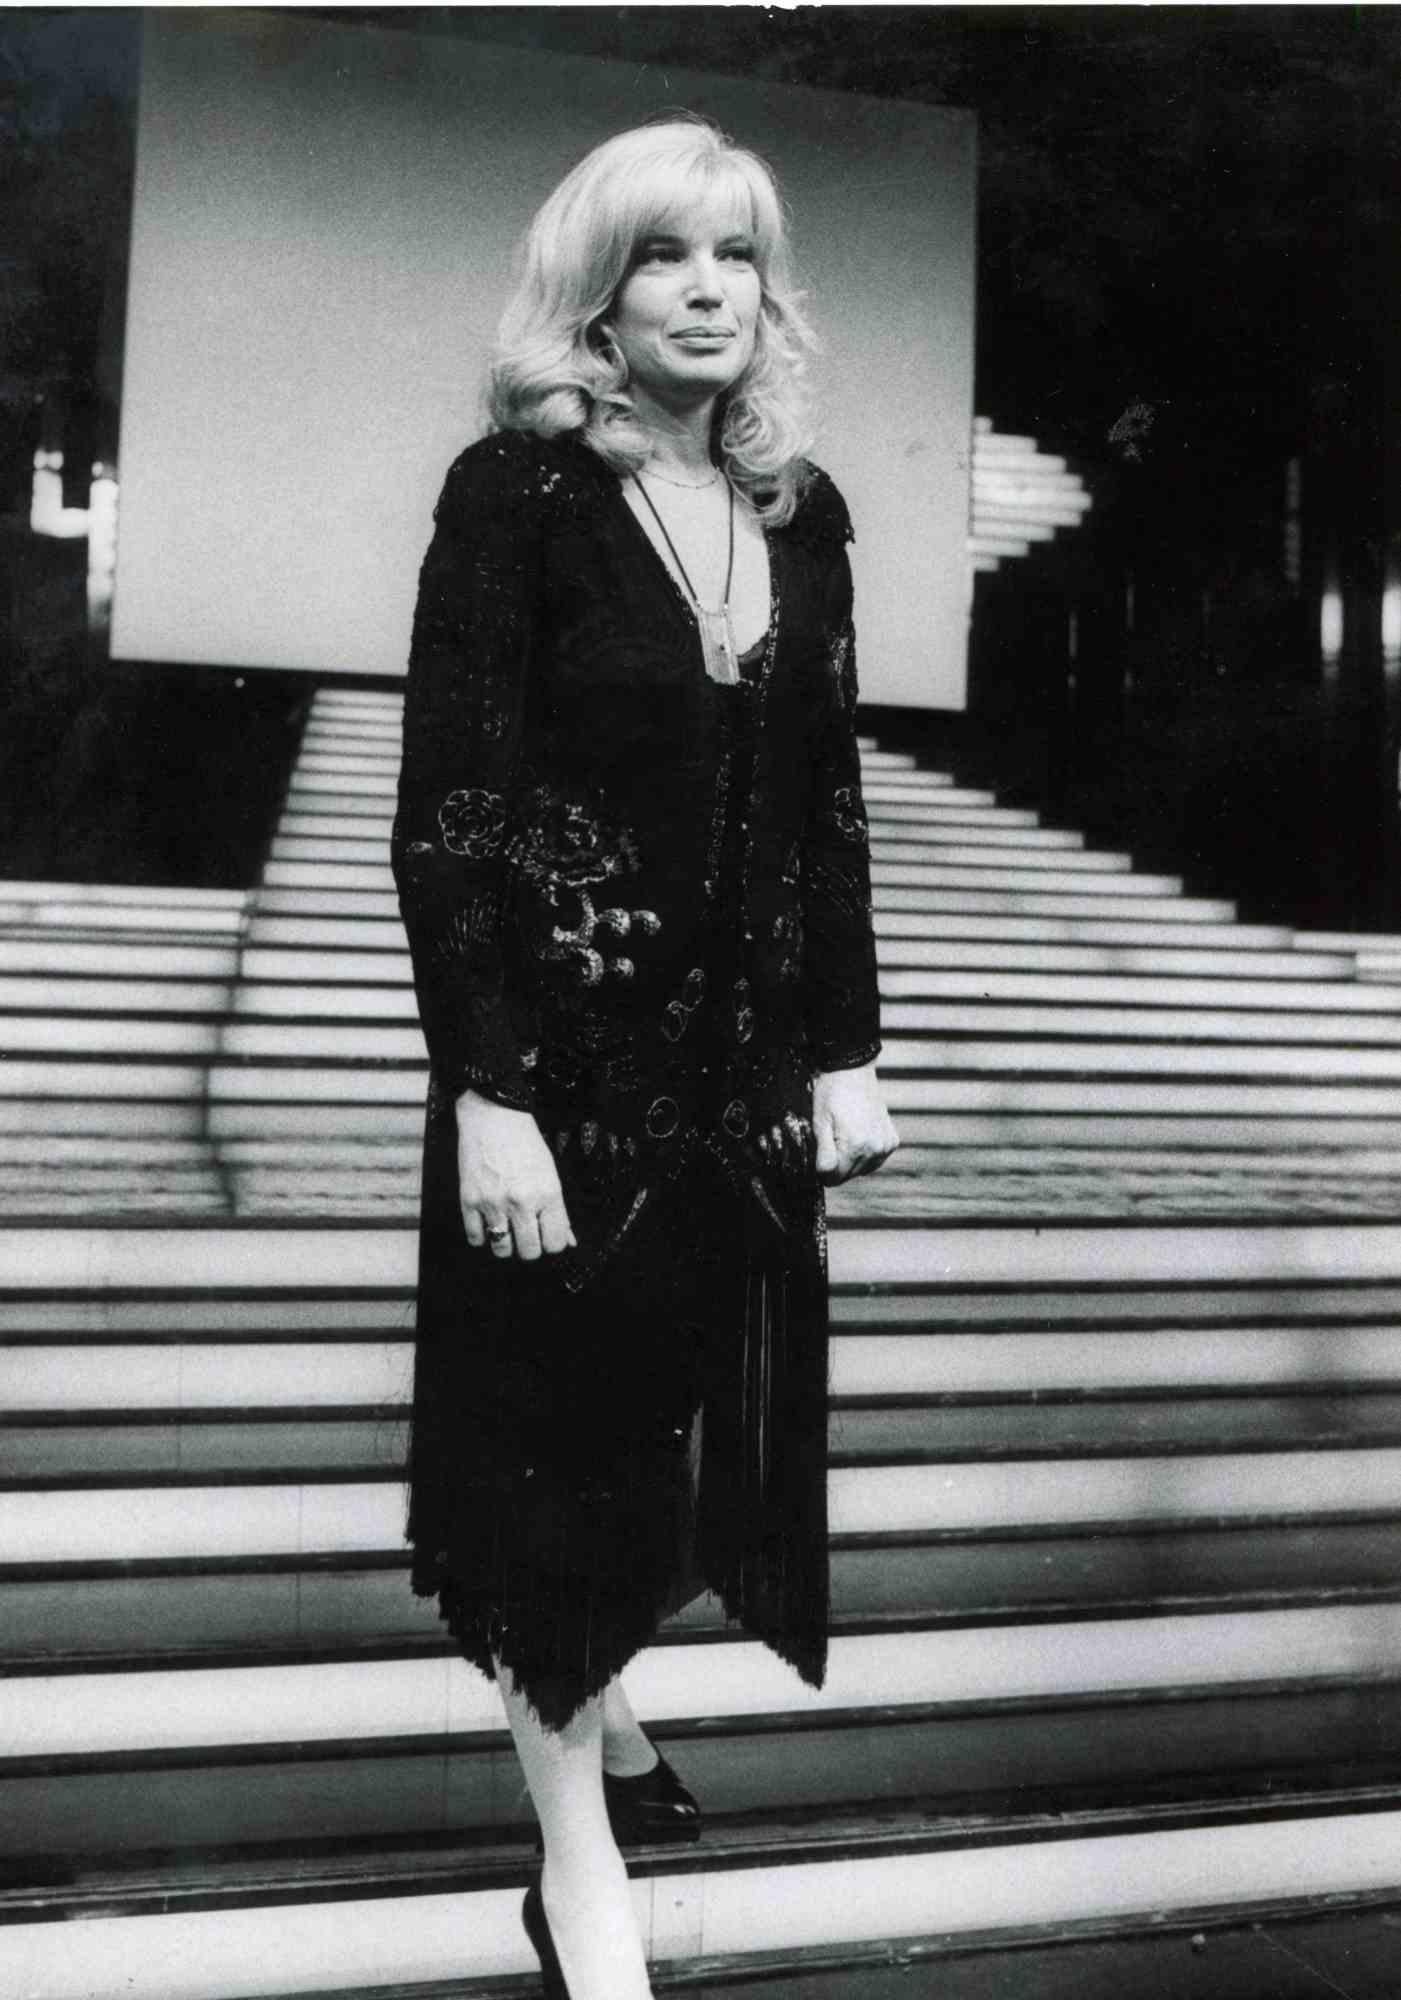 Unknown Black and White Photograph - Vintage Portrait of Monica Vitti - Vintage b/w Photo - End of 1970s